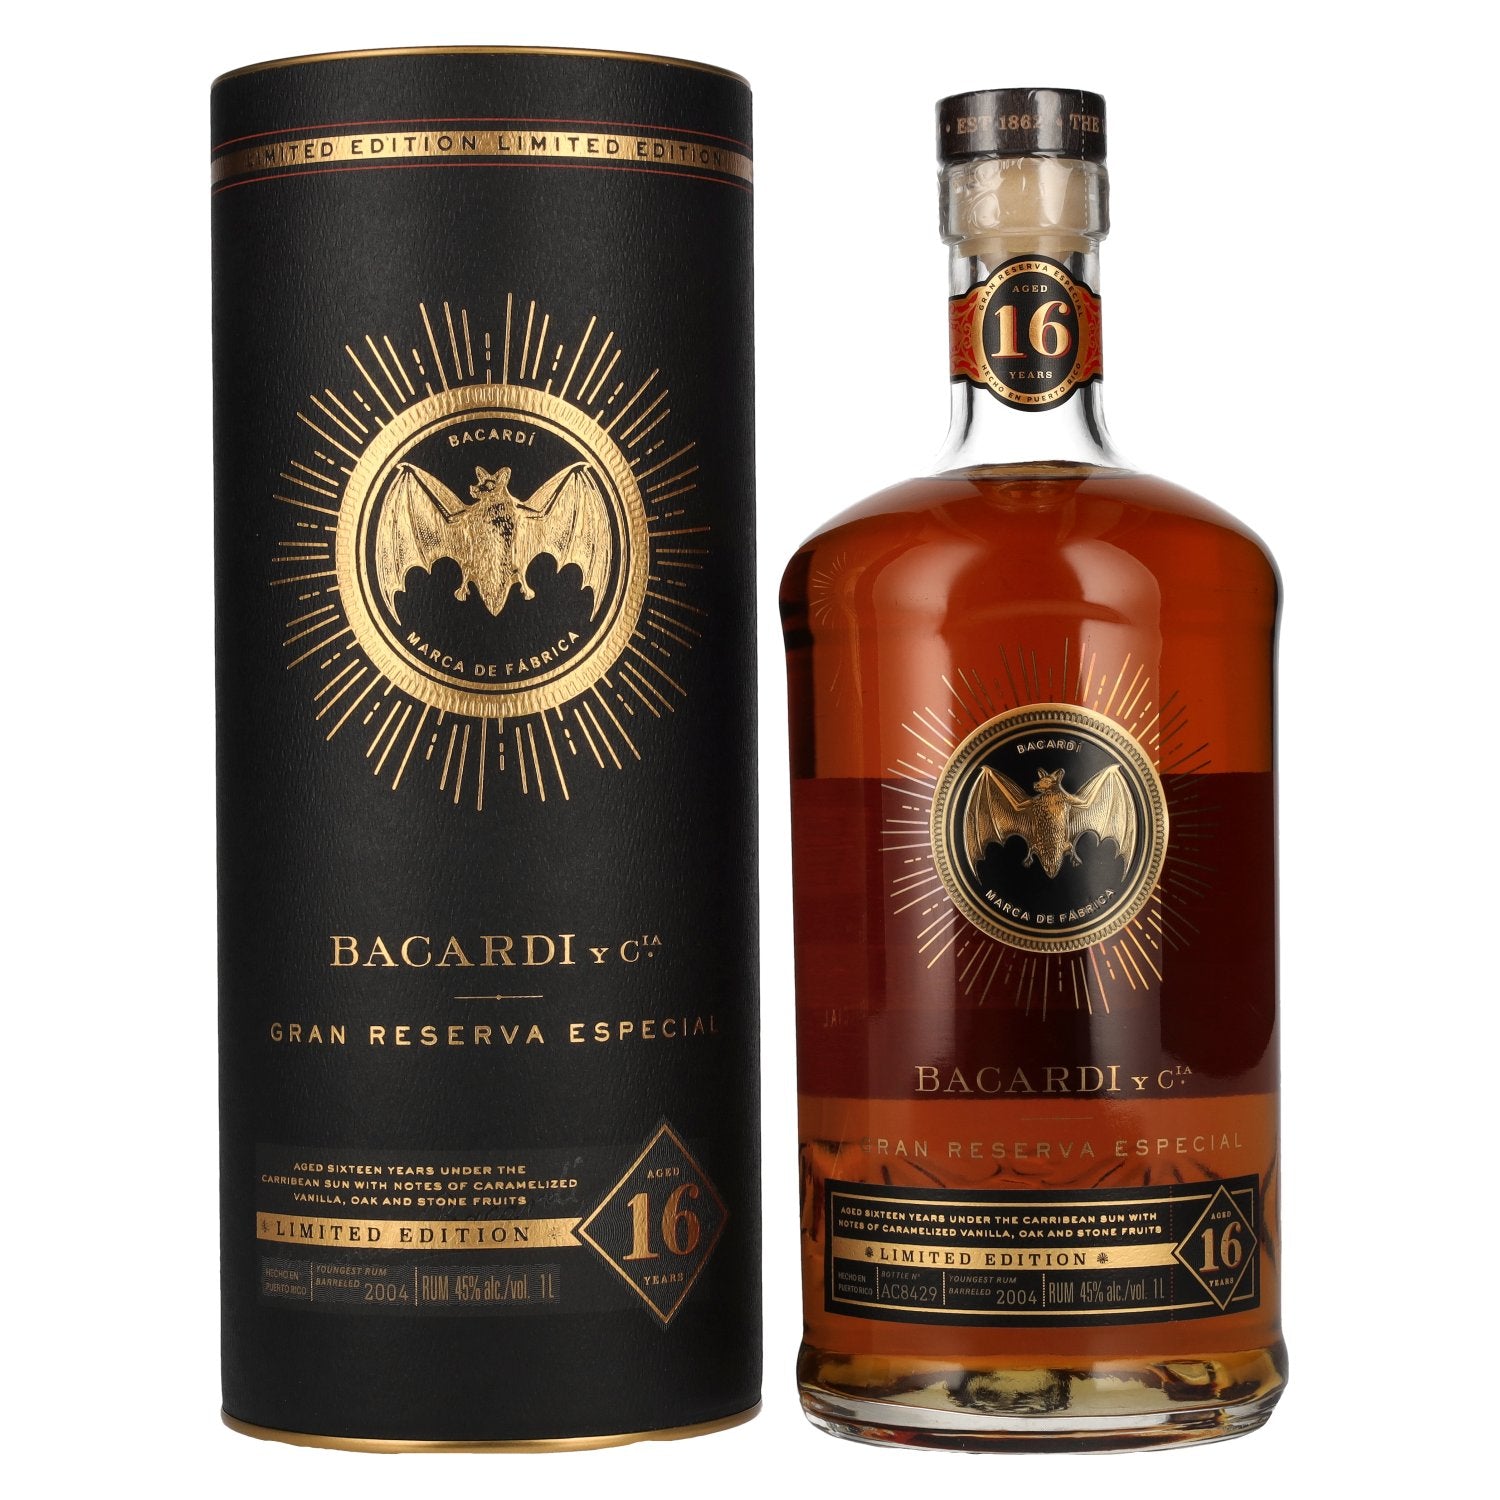 Bacardi 16 Years Old Gran Reserva Especial Limited Edition 45% Vol. 1l in Giftbox